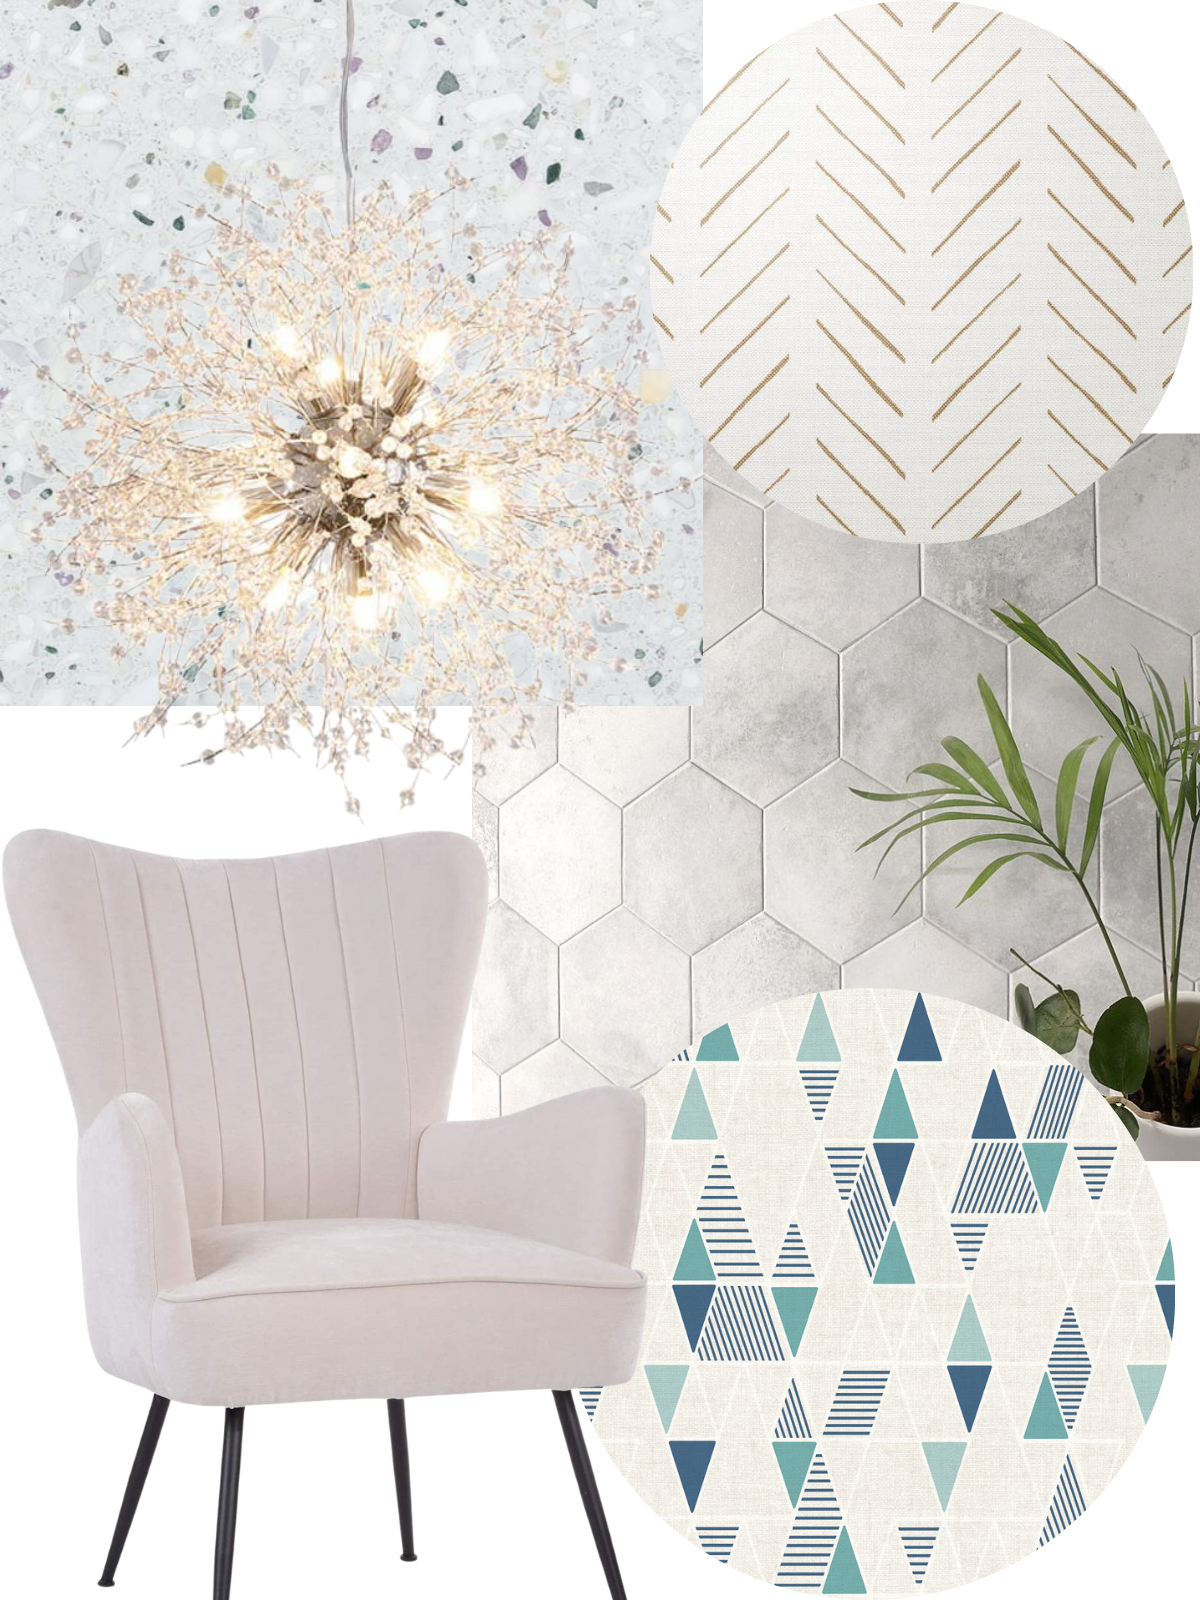 mood board showing wall finishes, lounge chair, chandelier